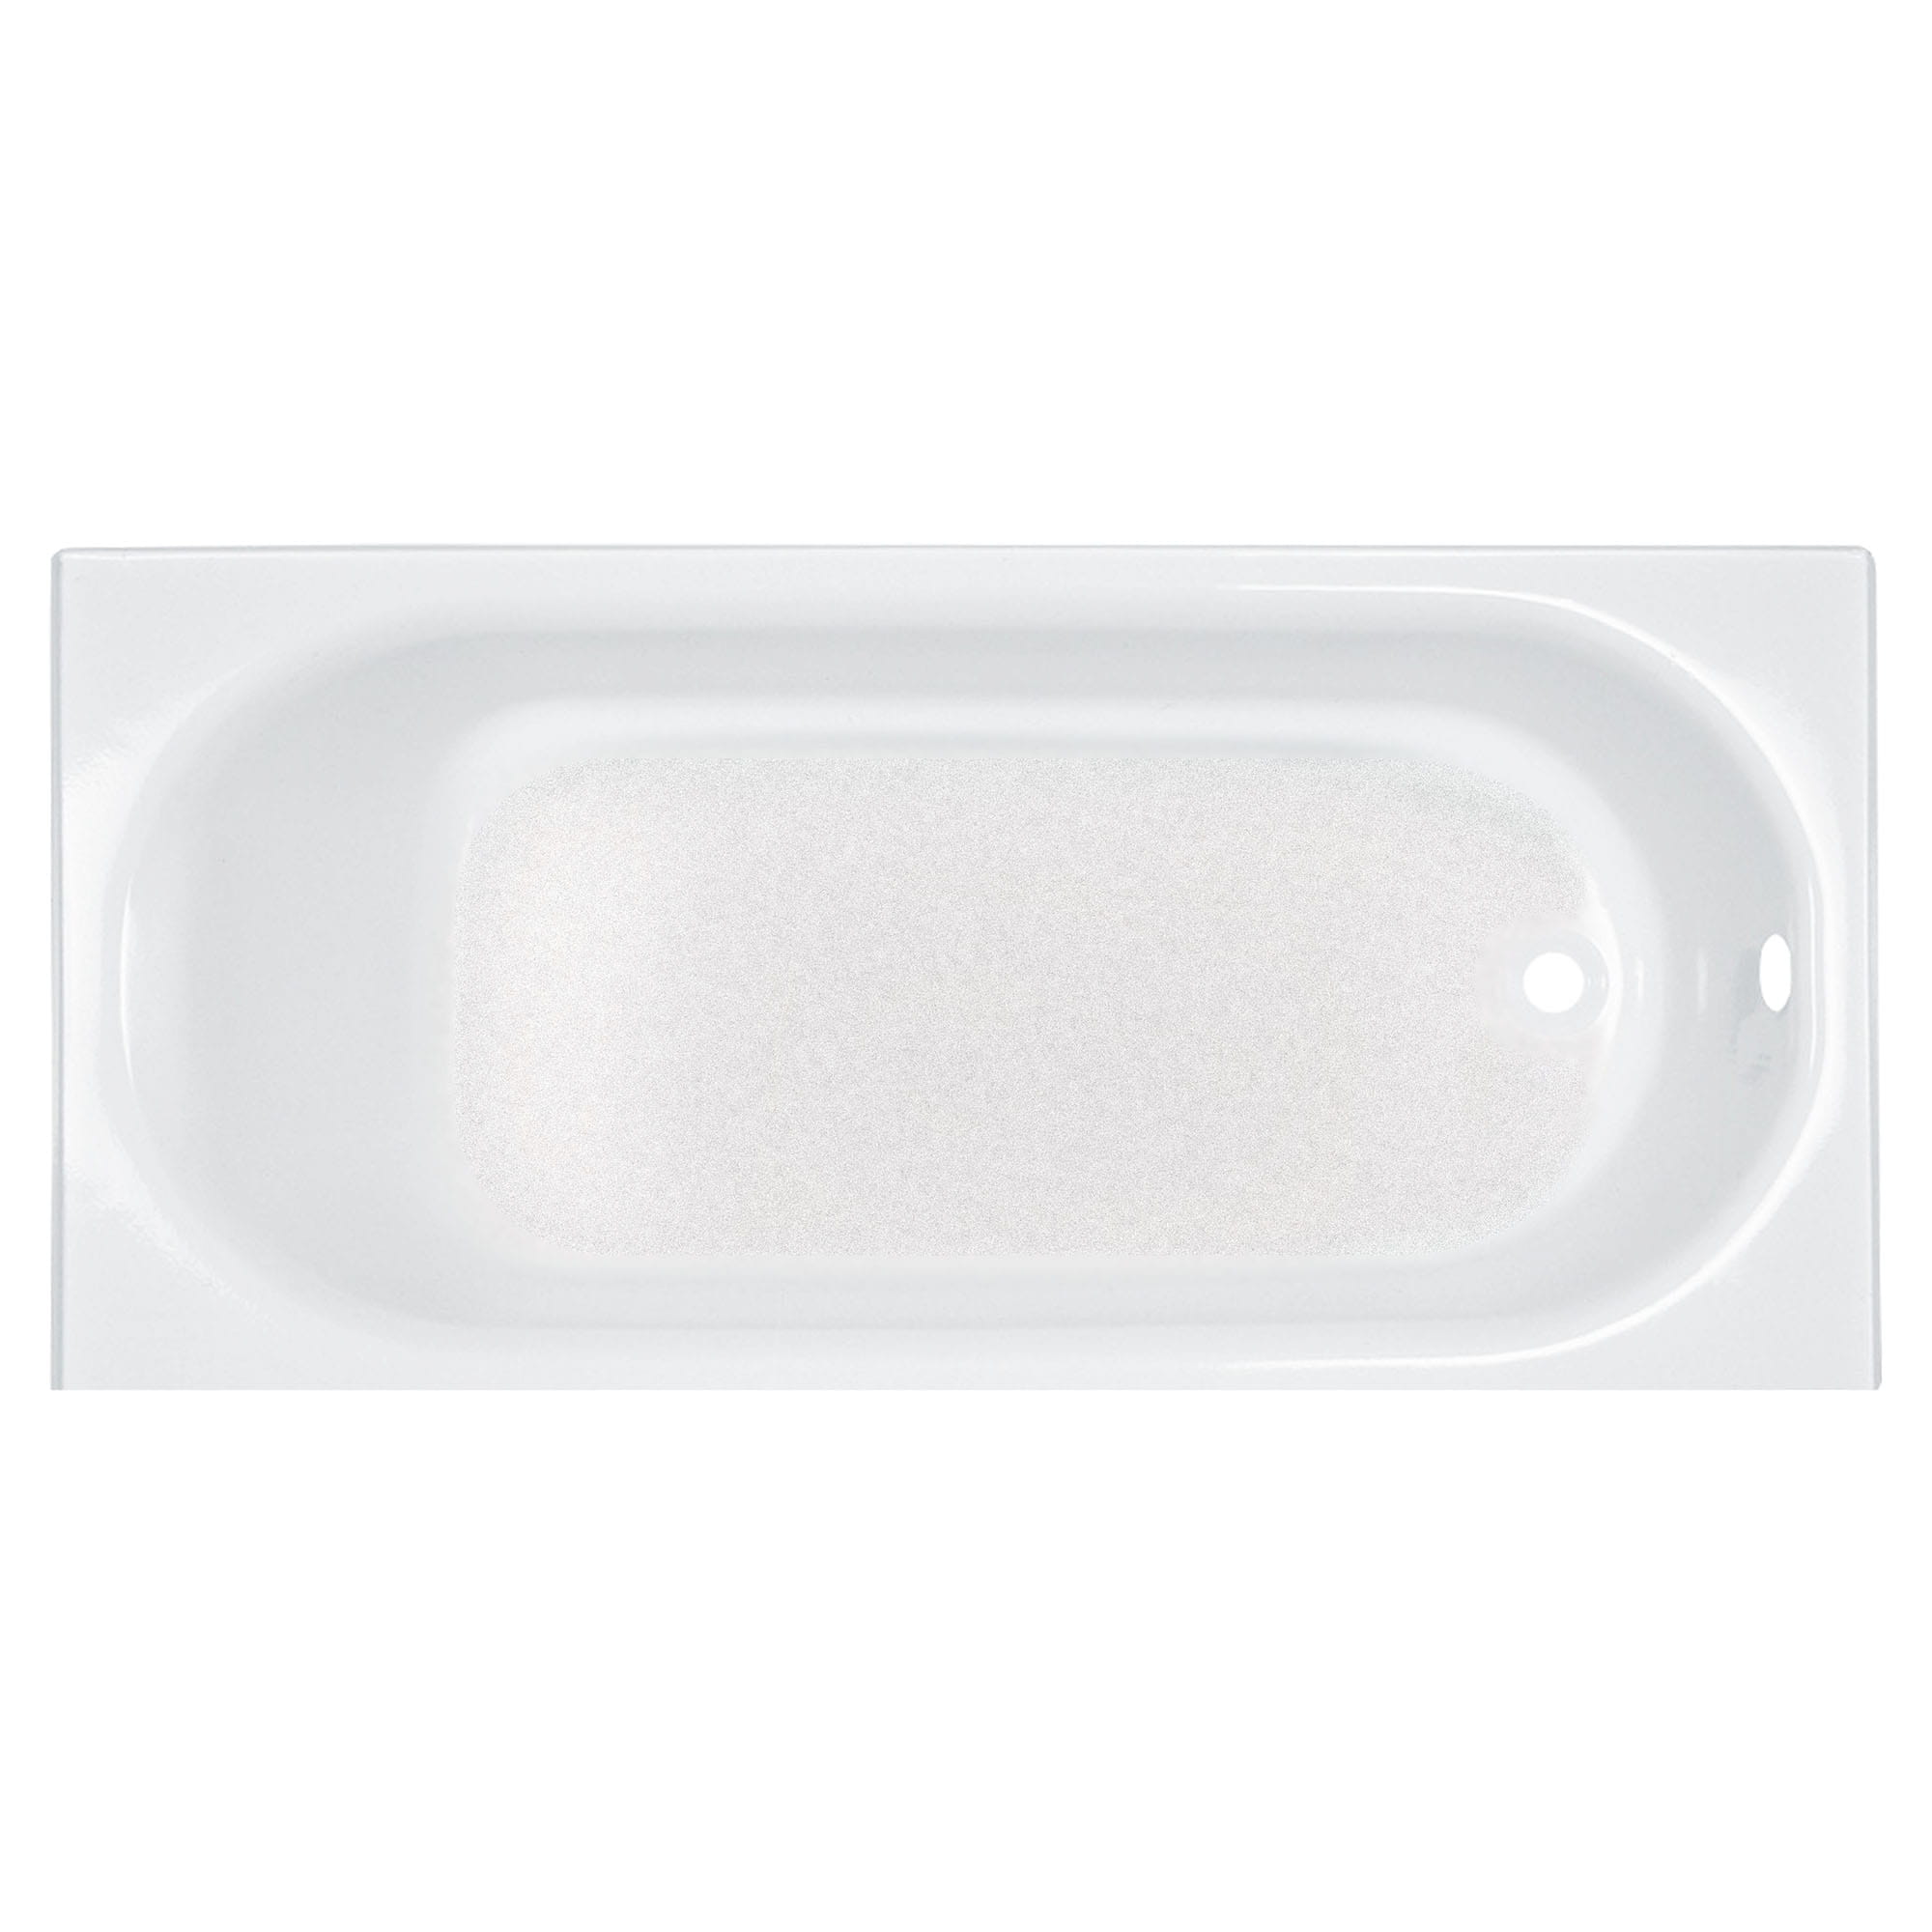 Princeton Americast 60 x 30 Inch Integral Apron Bathtub Above Floor Rough with Right Hand Outlet ARCTIC